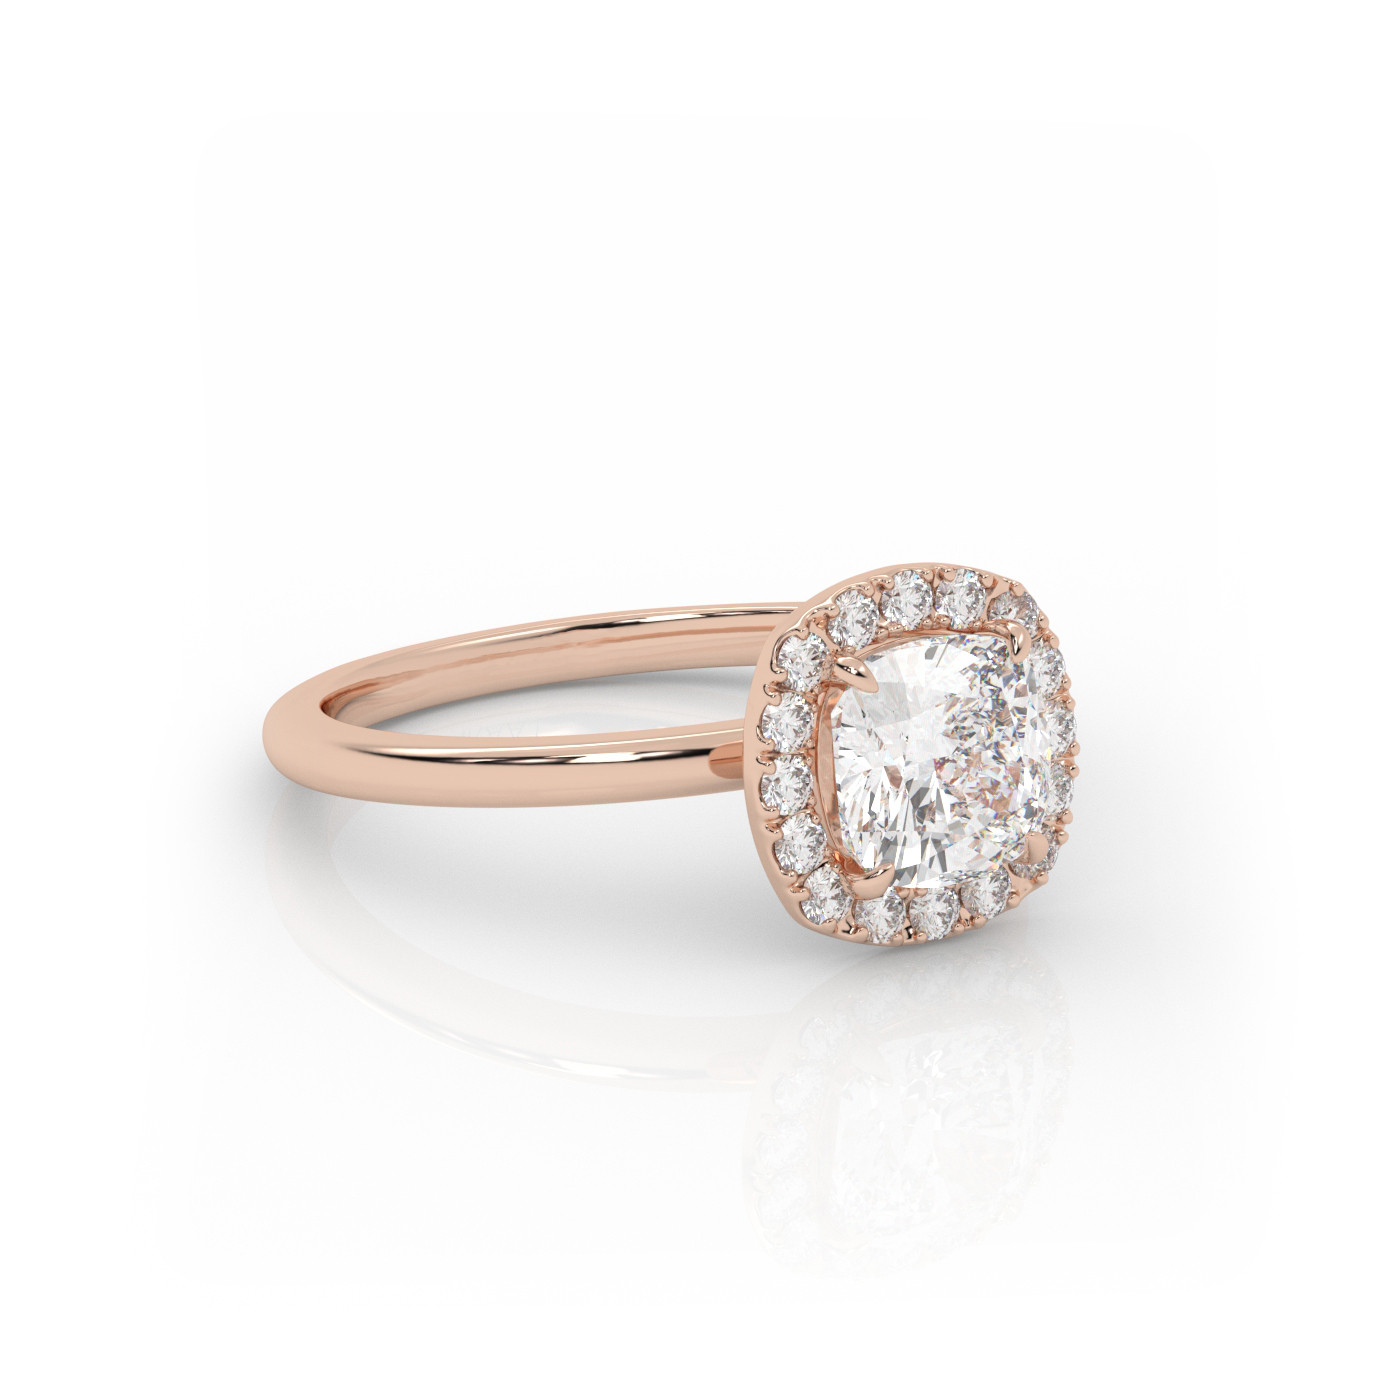 18K ROSE GOLD Cushion Cut Engagement Ring with Halo Style